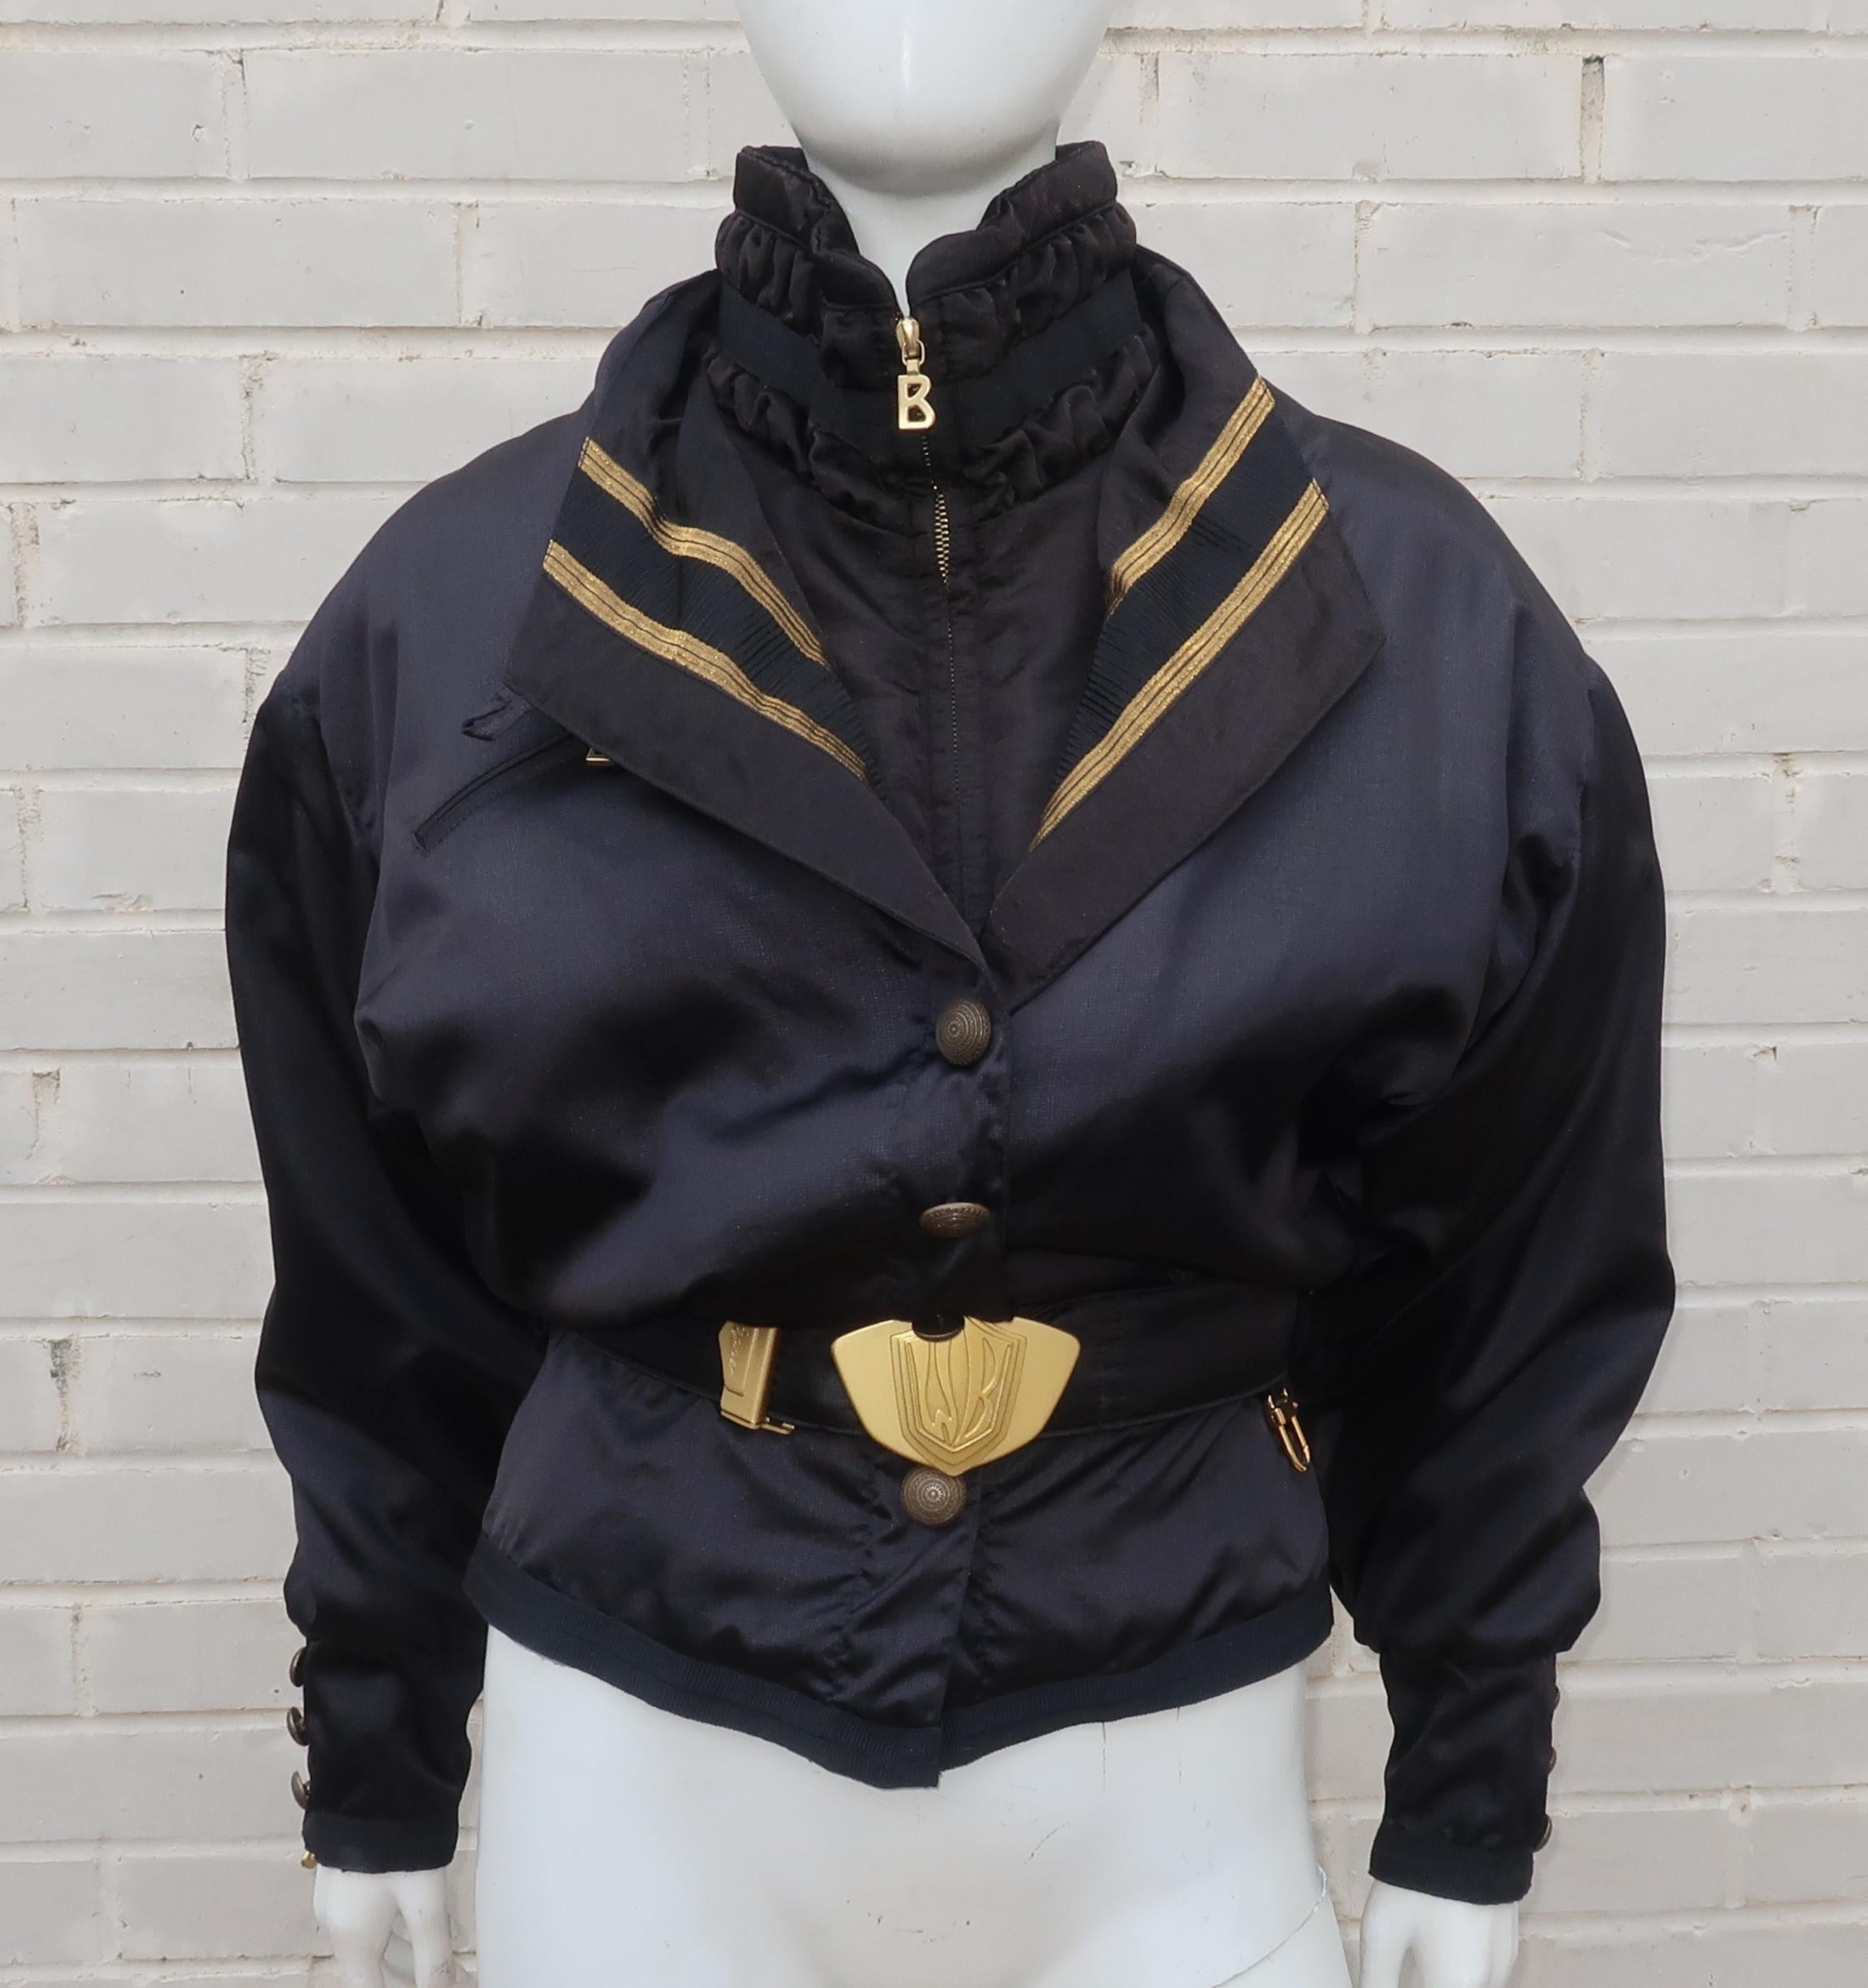 1980's glam style hits the slopes in a black ski jacket by iconic German sportswear designer, Bogner.  The classic ski jacket is made from nylon with cotton and polyester padding accented by gold lame trim, Norwegian folkloric brass buttons and the